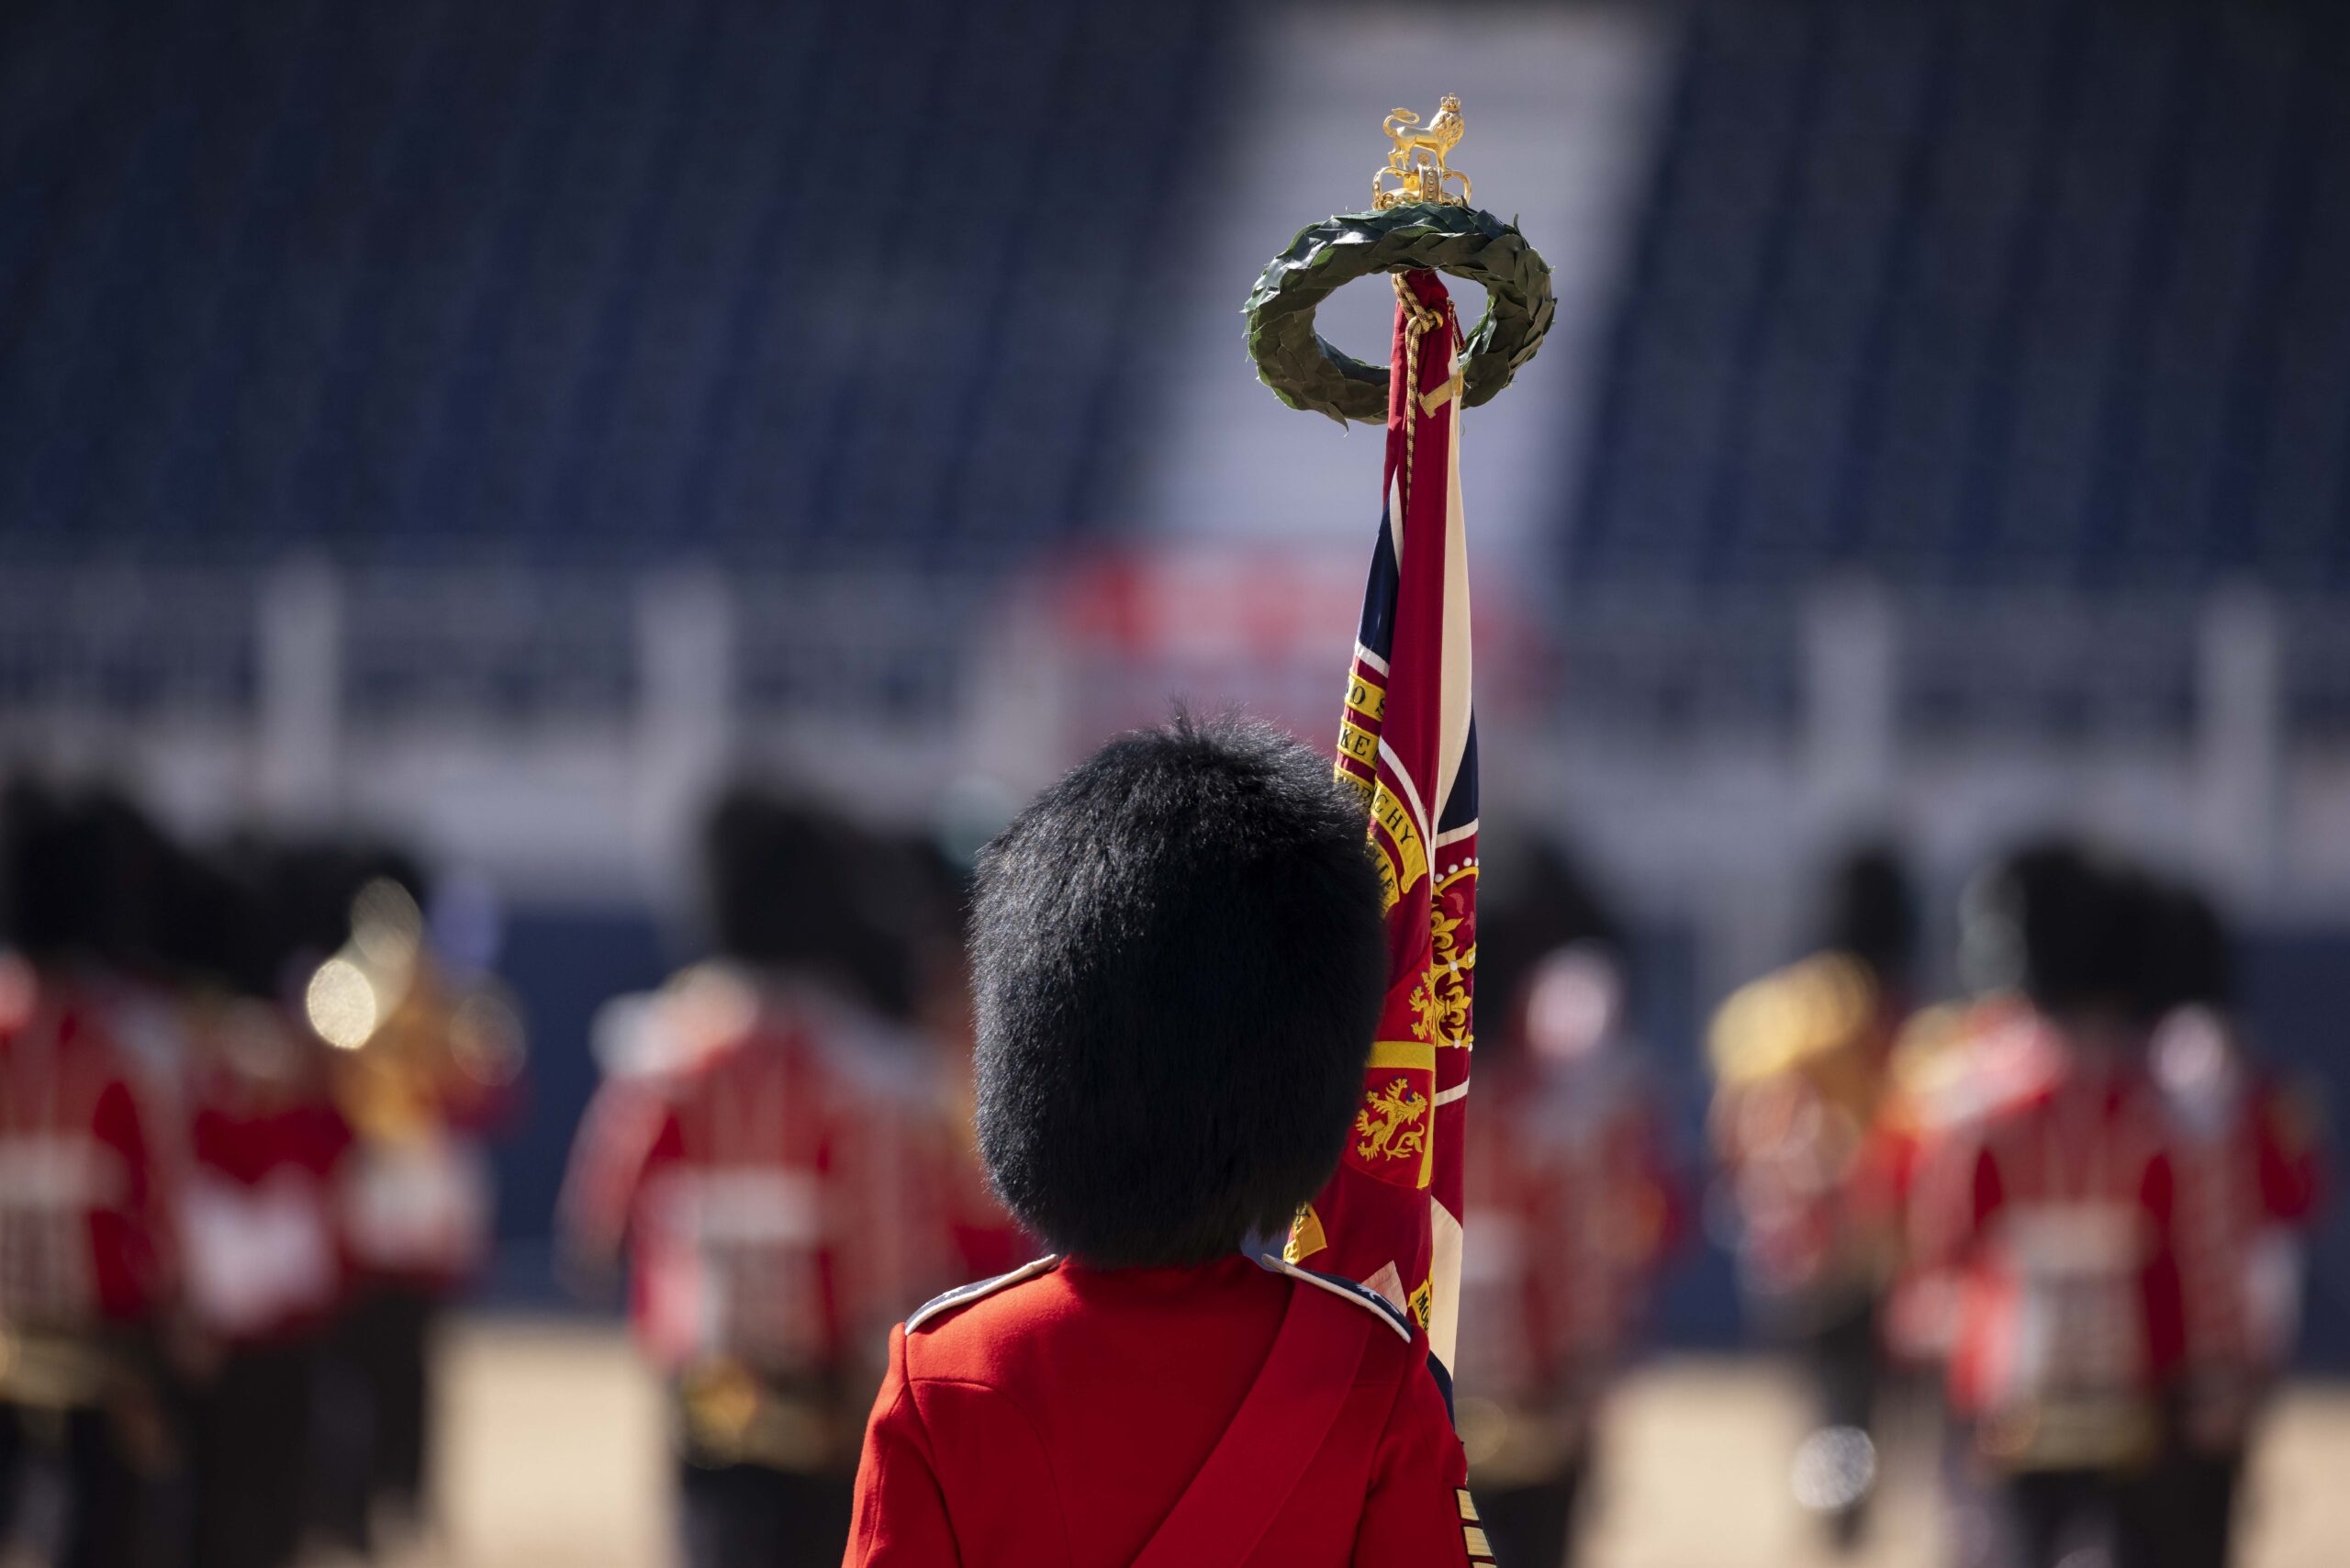 Rehearsals in London for the first King’s Birthday Parade in 70 years – Royal Central